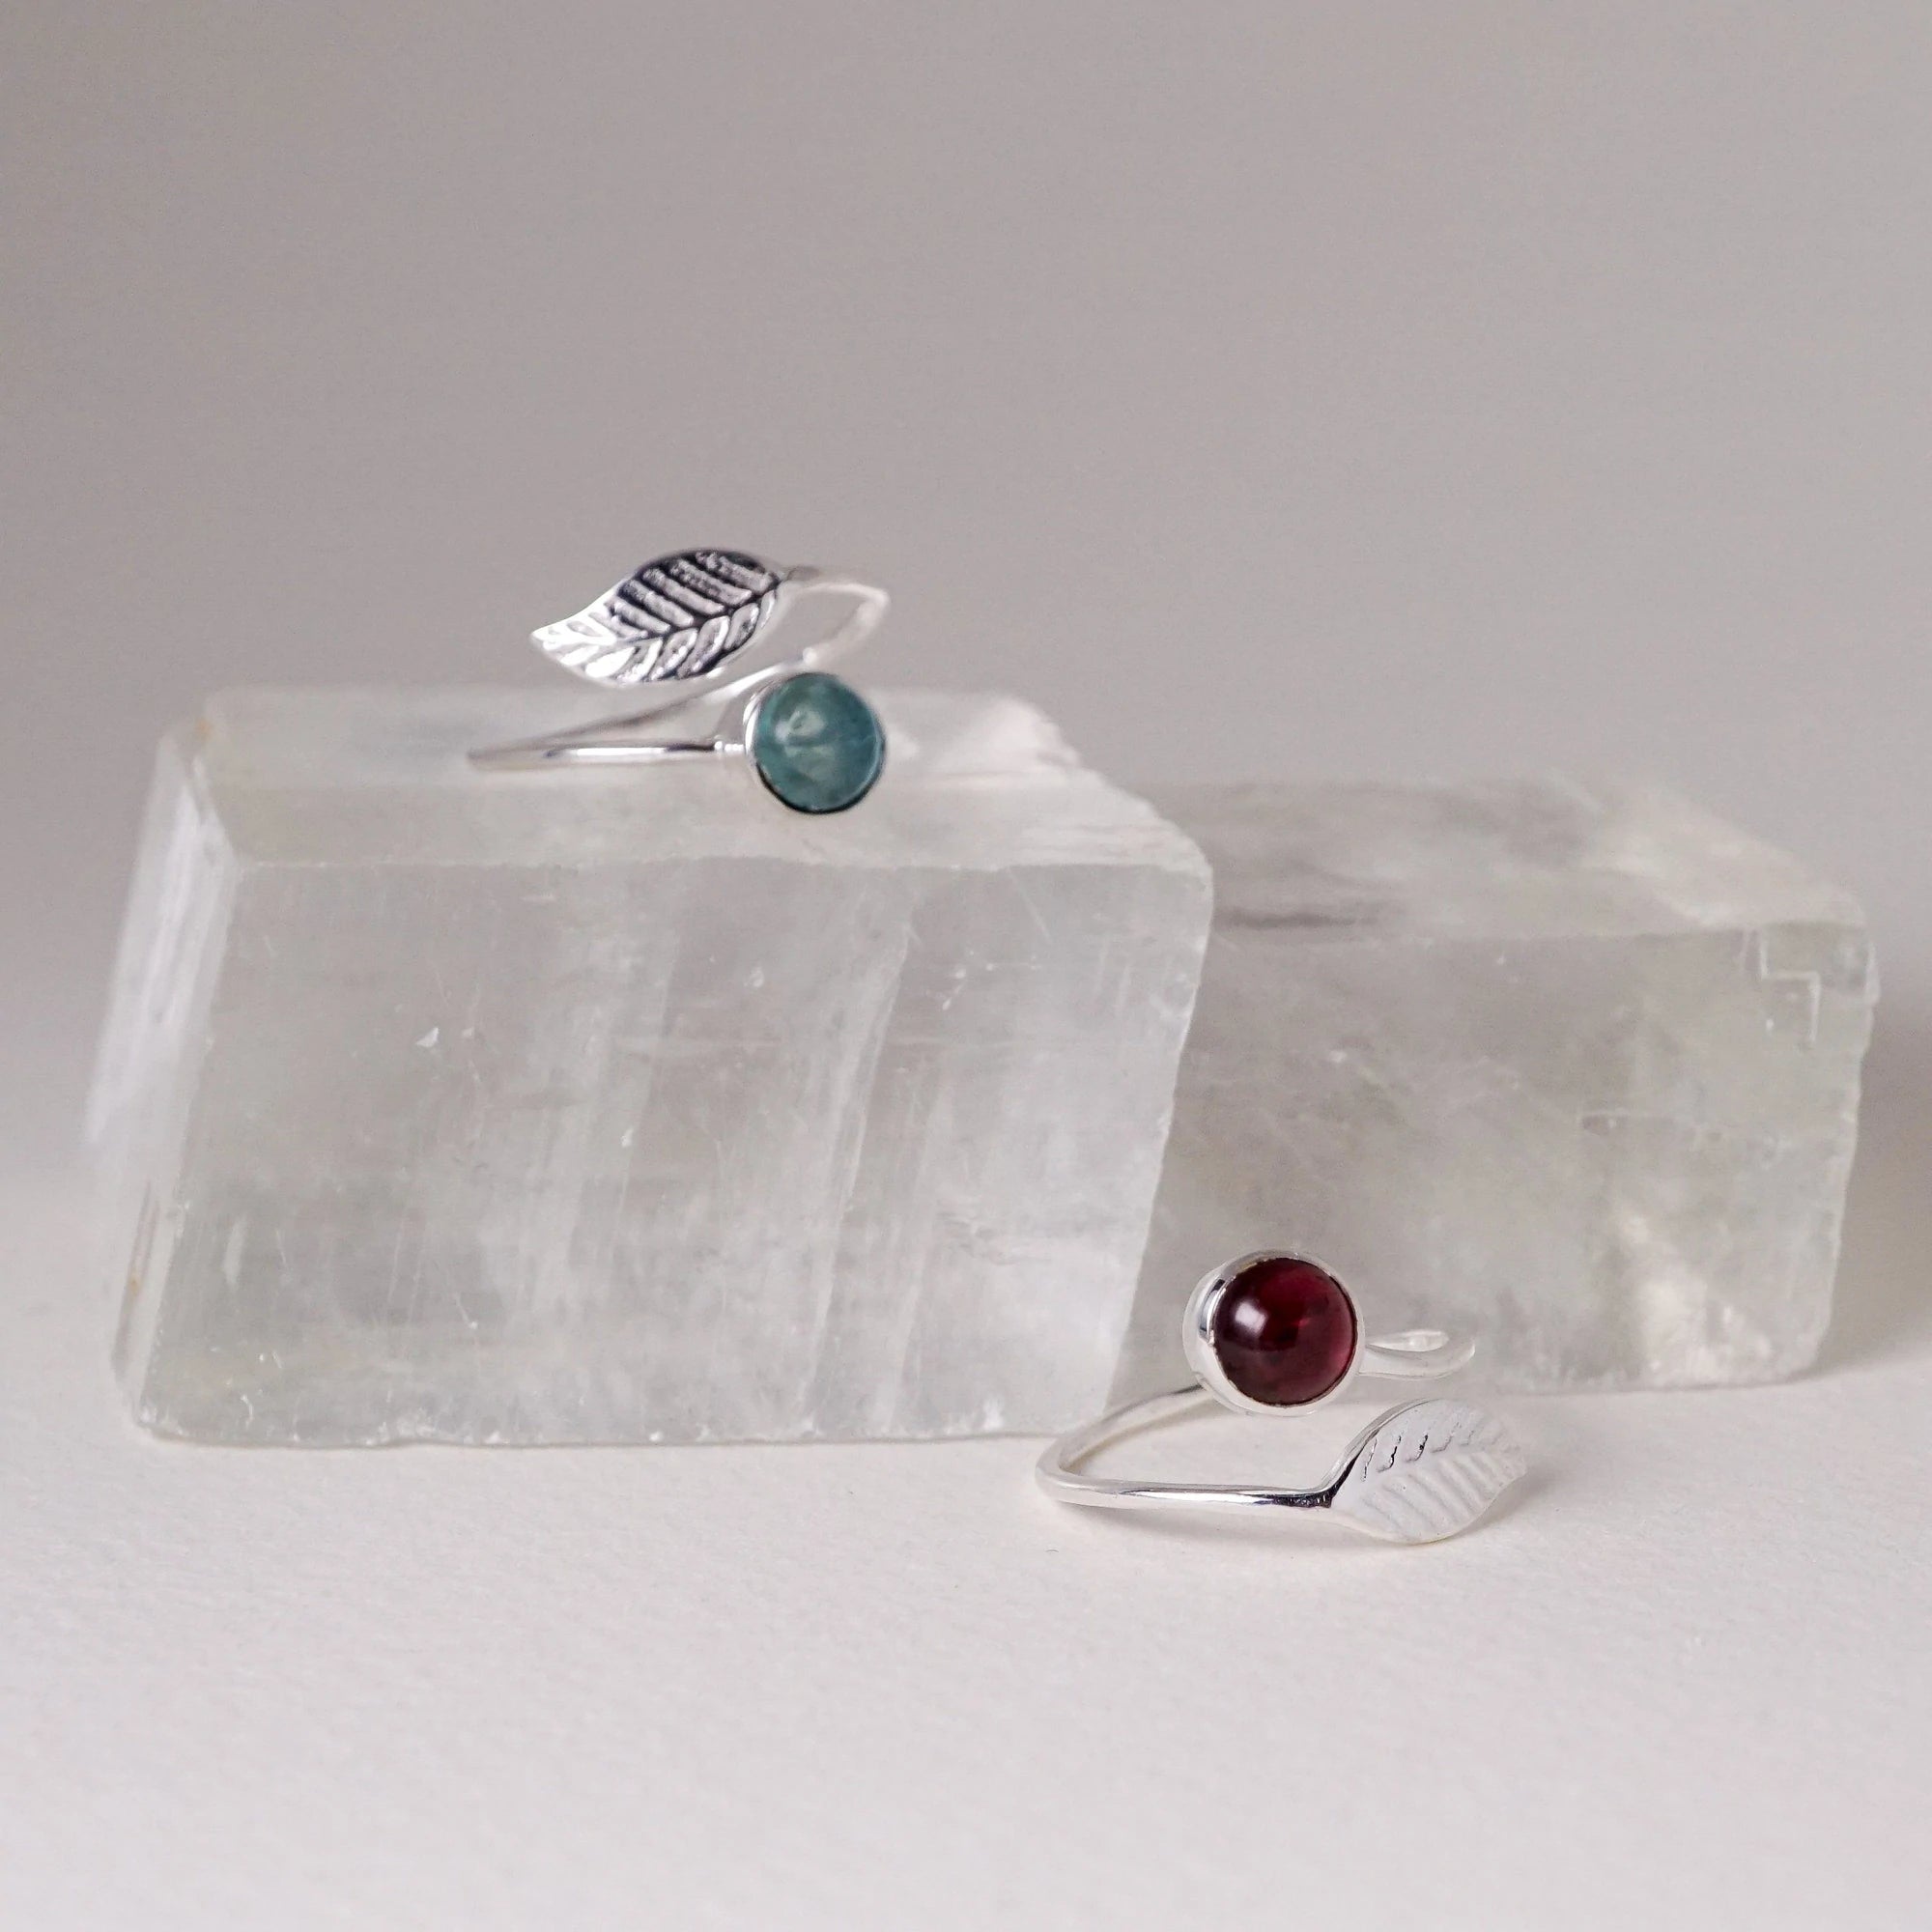 Garden of Desire - Leaf and Stone Ring Handcrafted Apatite and Garnet with Sterling Silver 92.5, this ring wraps around your finger very gently and lightly, like a feather. Perfect for everyday to impress.